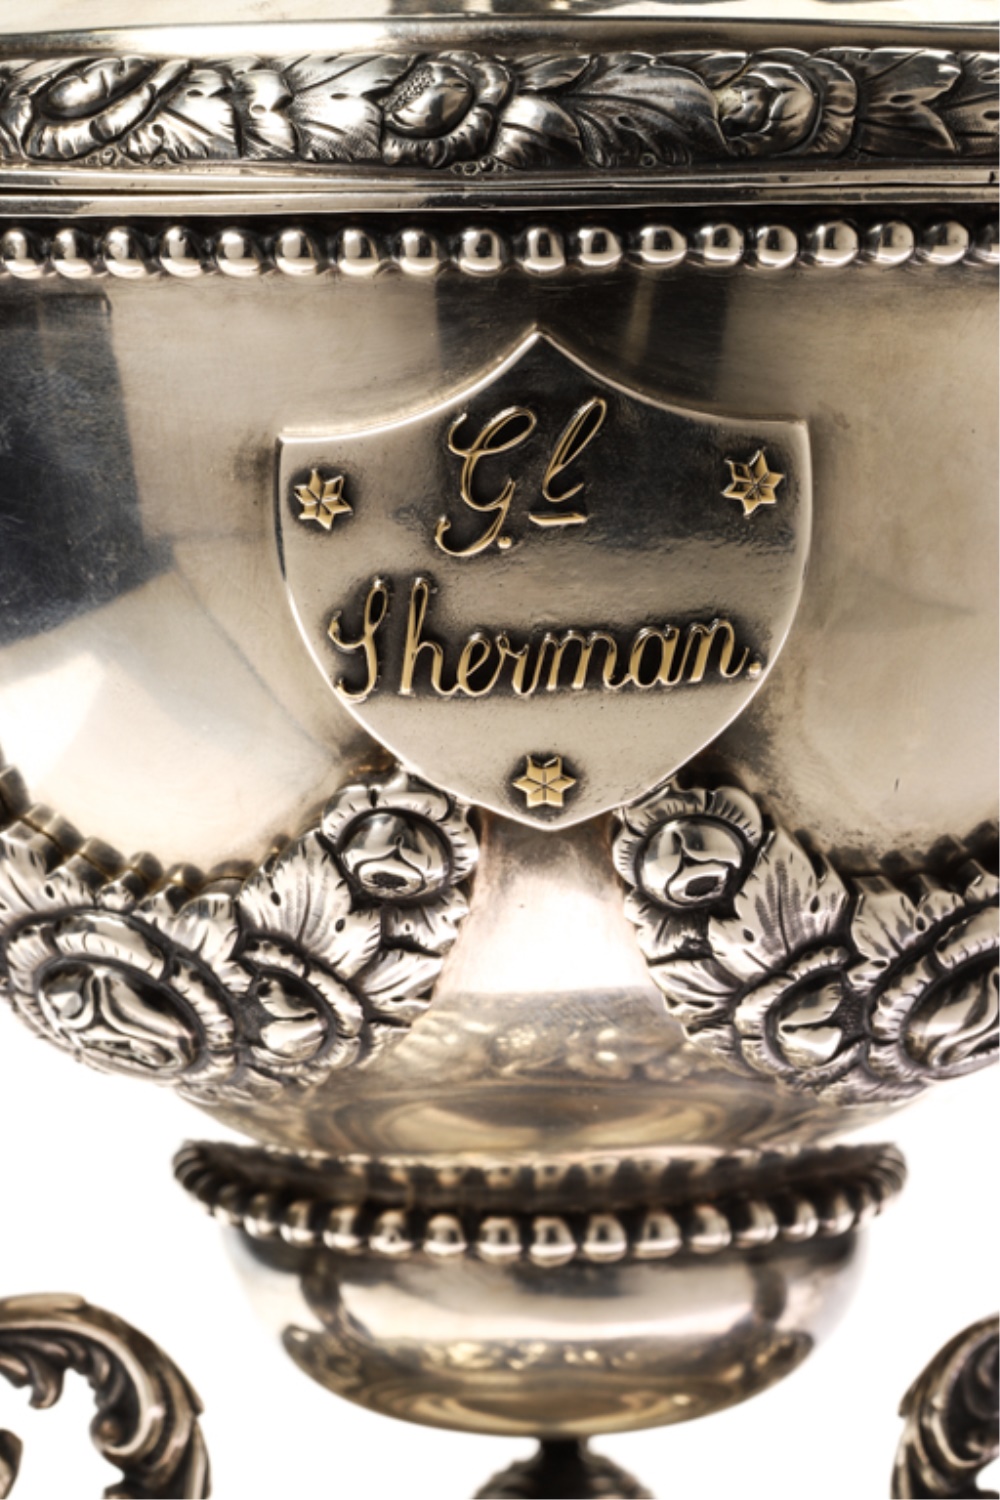 Shield Detail, Covered Historical Silver Presentation Cup, From John McInnis Auctioneers Two Day May, 2019 Estates Auction.